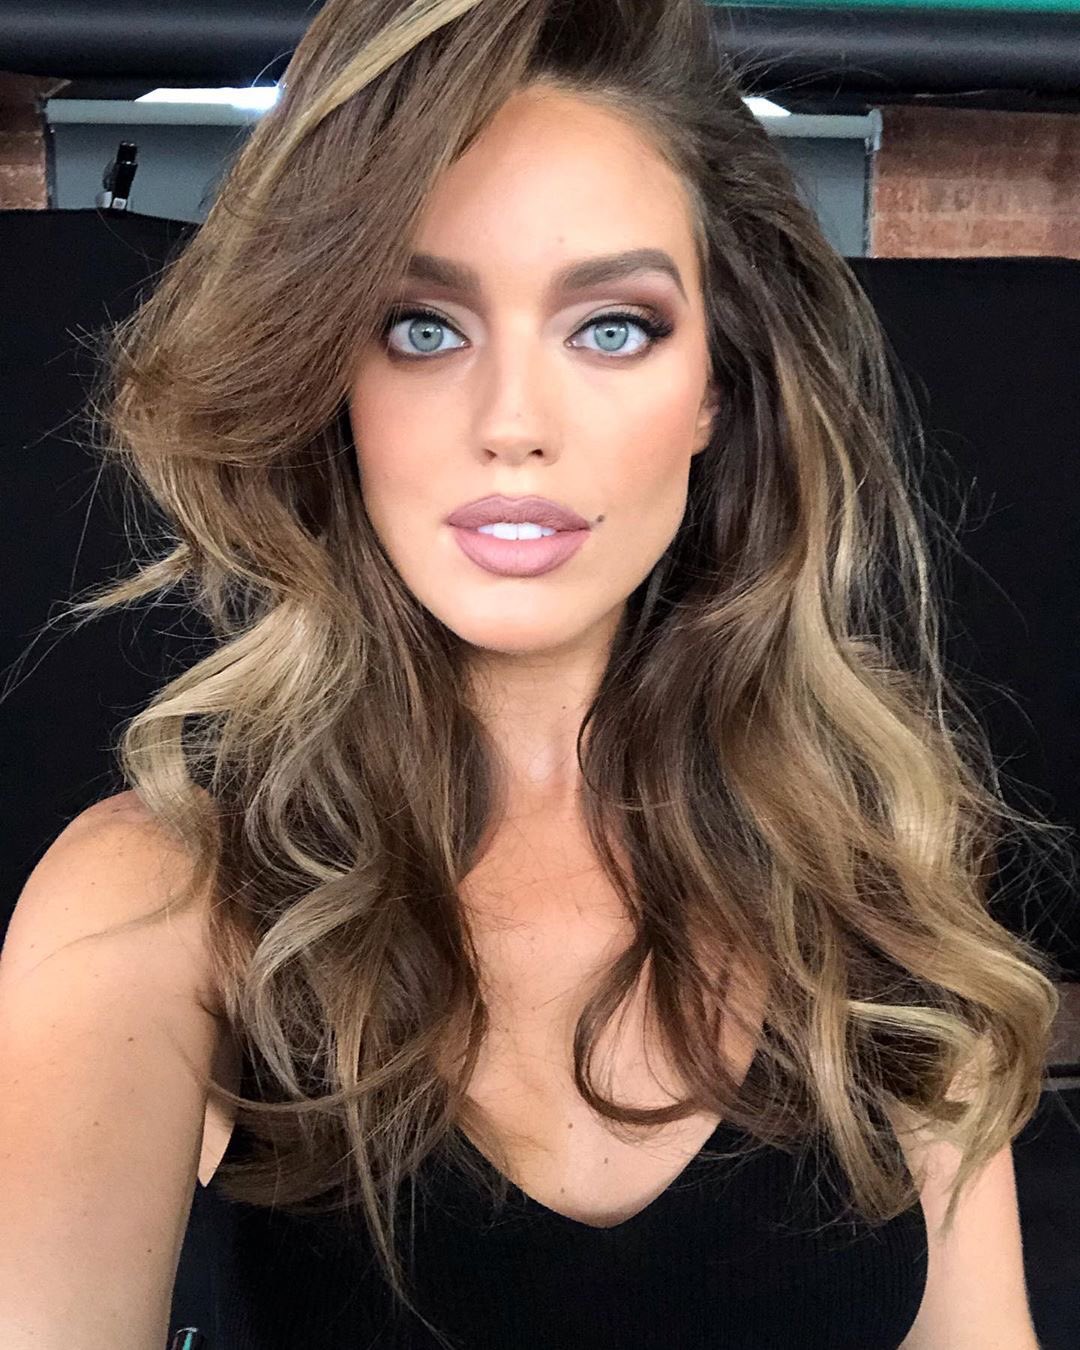 Emily DiDonato Source Twitter: "This goddess 🌟 behind the scenes of a #Maybelline tutorial a Halloween makeup inspired by 90s supermodel! https://t.co/NeqUXpt1RN" / Twitter